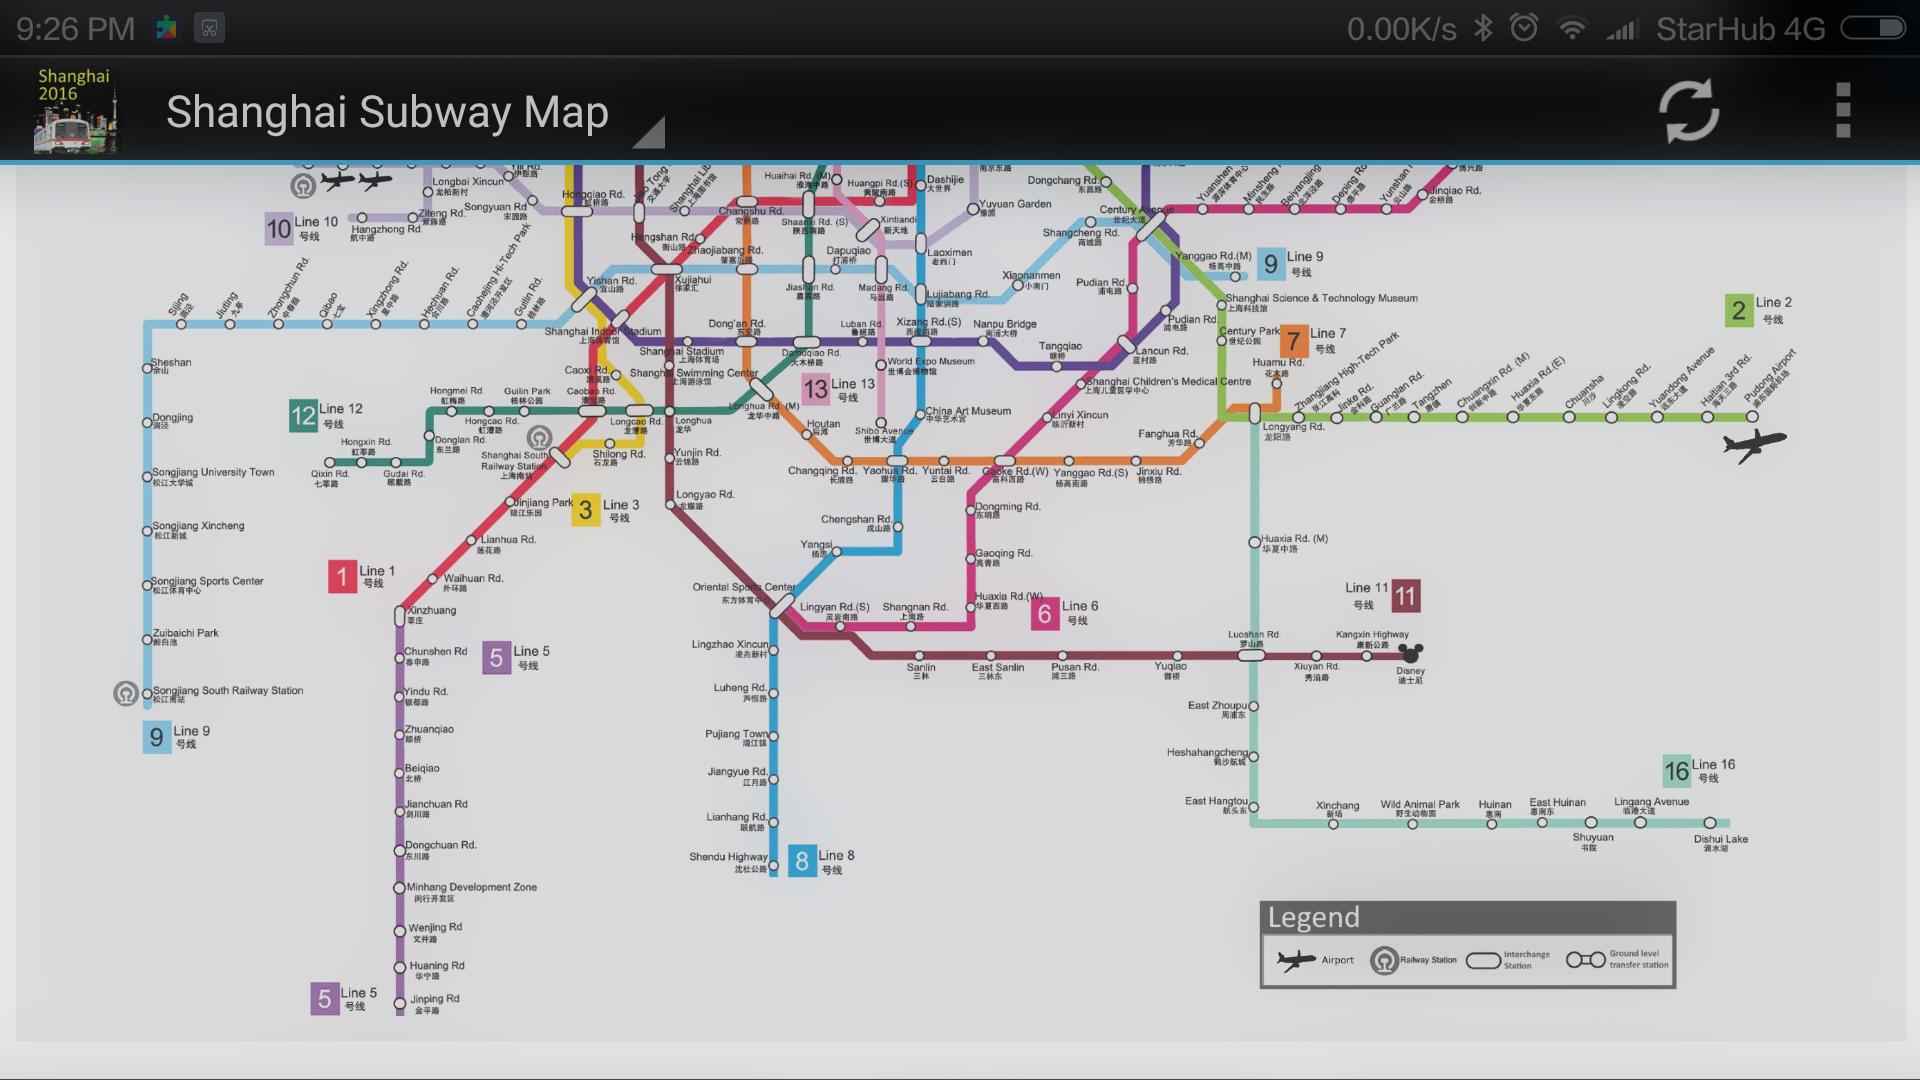 Shanghai Subway Metro Map 2019 for Android - APK Download